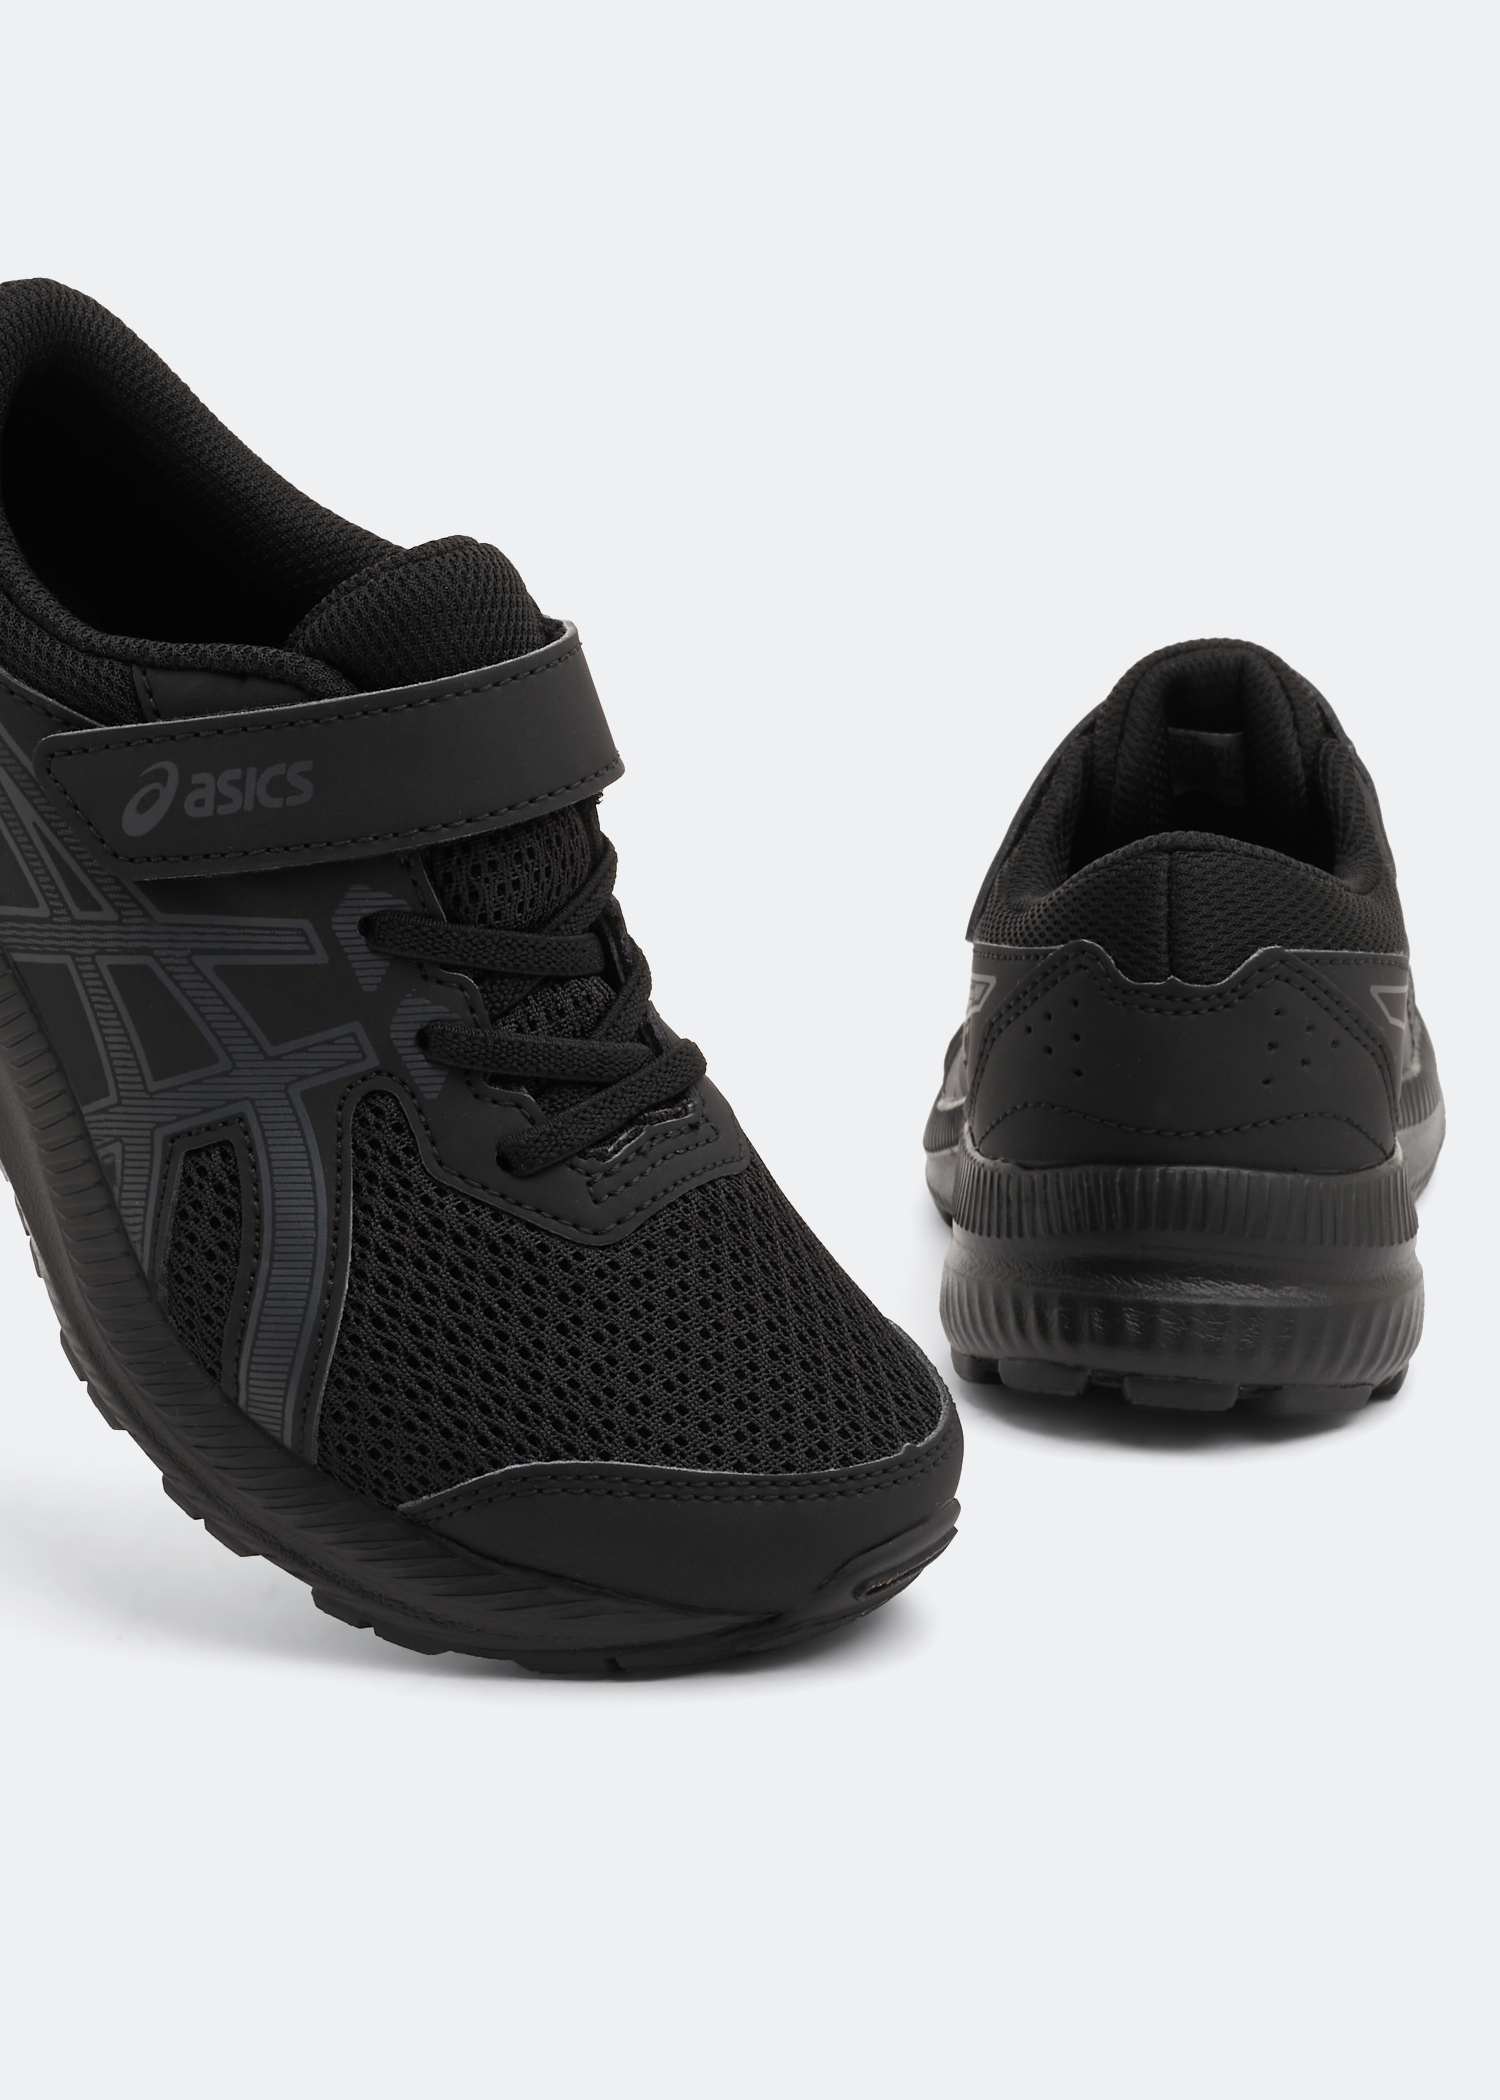 Asics Contend 8 PS mesh sneakers for Boy - Black in Kuwait | Level 